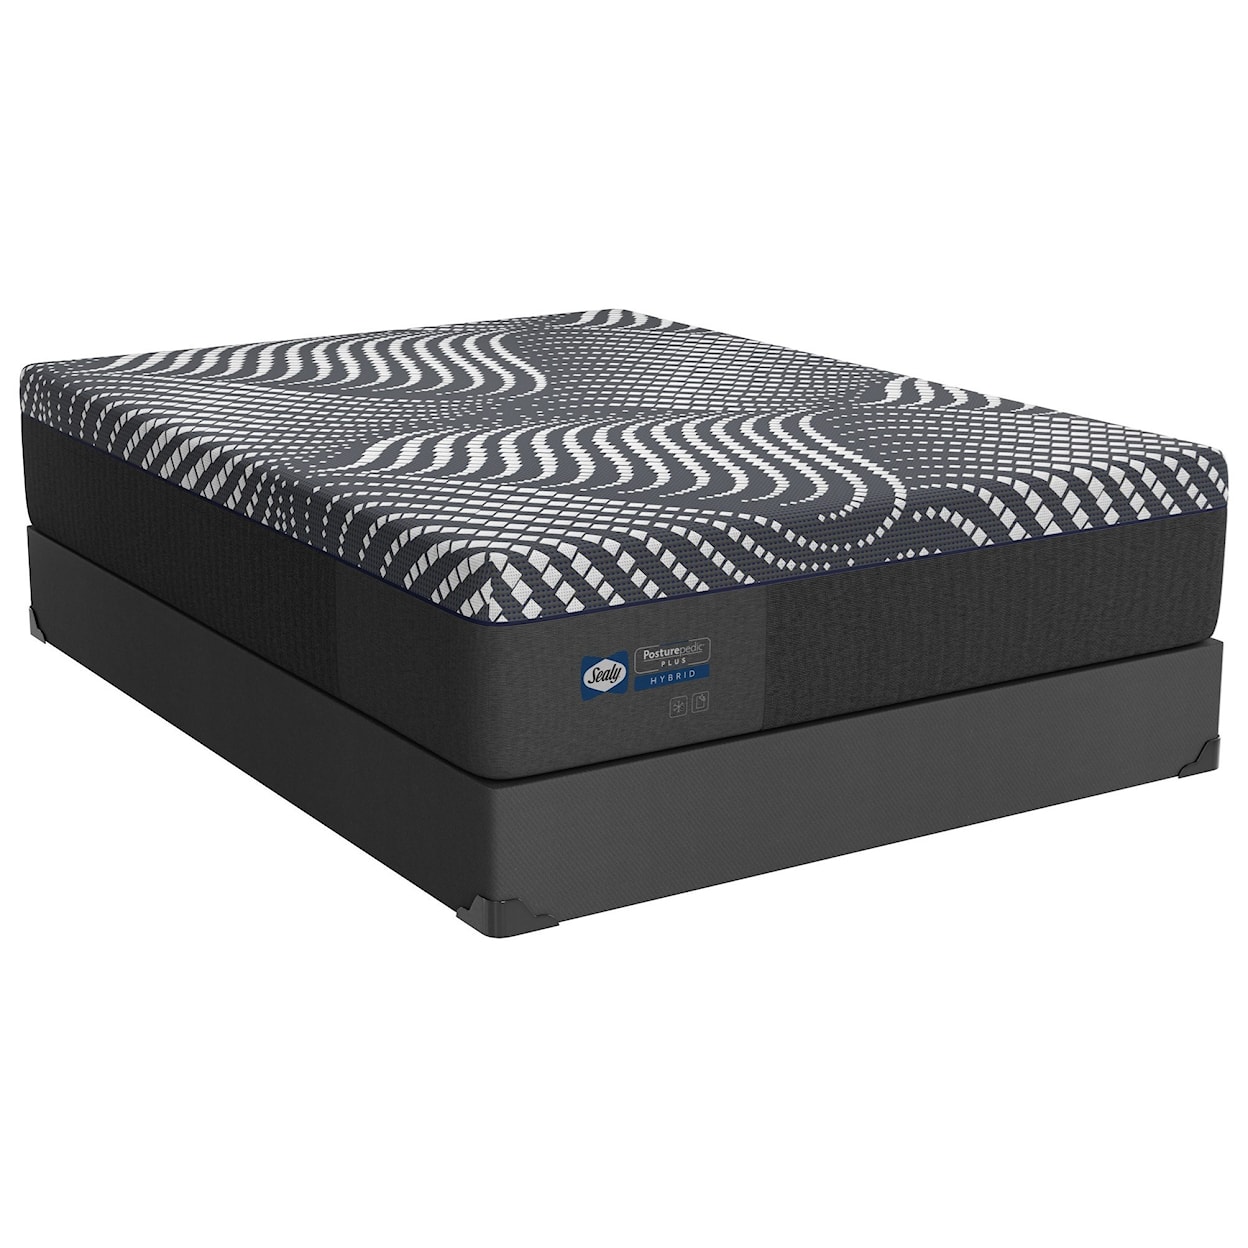 Sealy High Point Hybrid Soft Full Soft Mattress and 9" Foundation